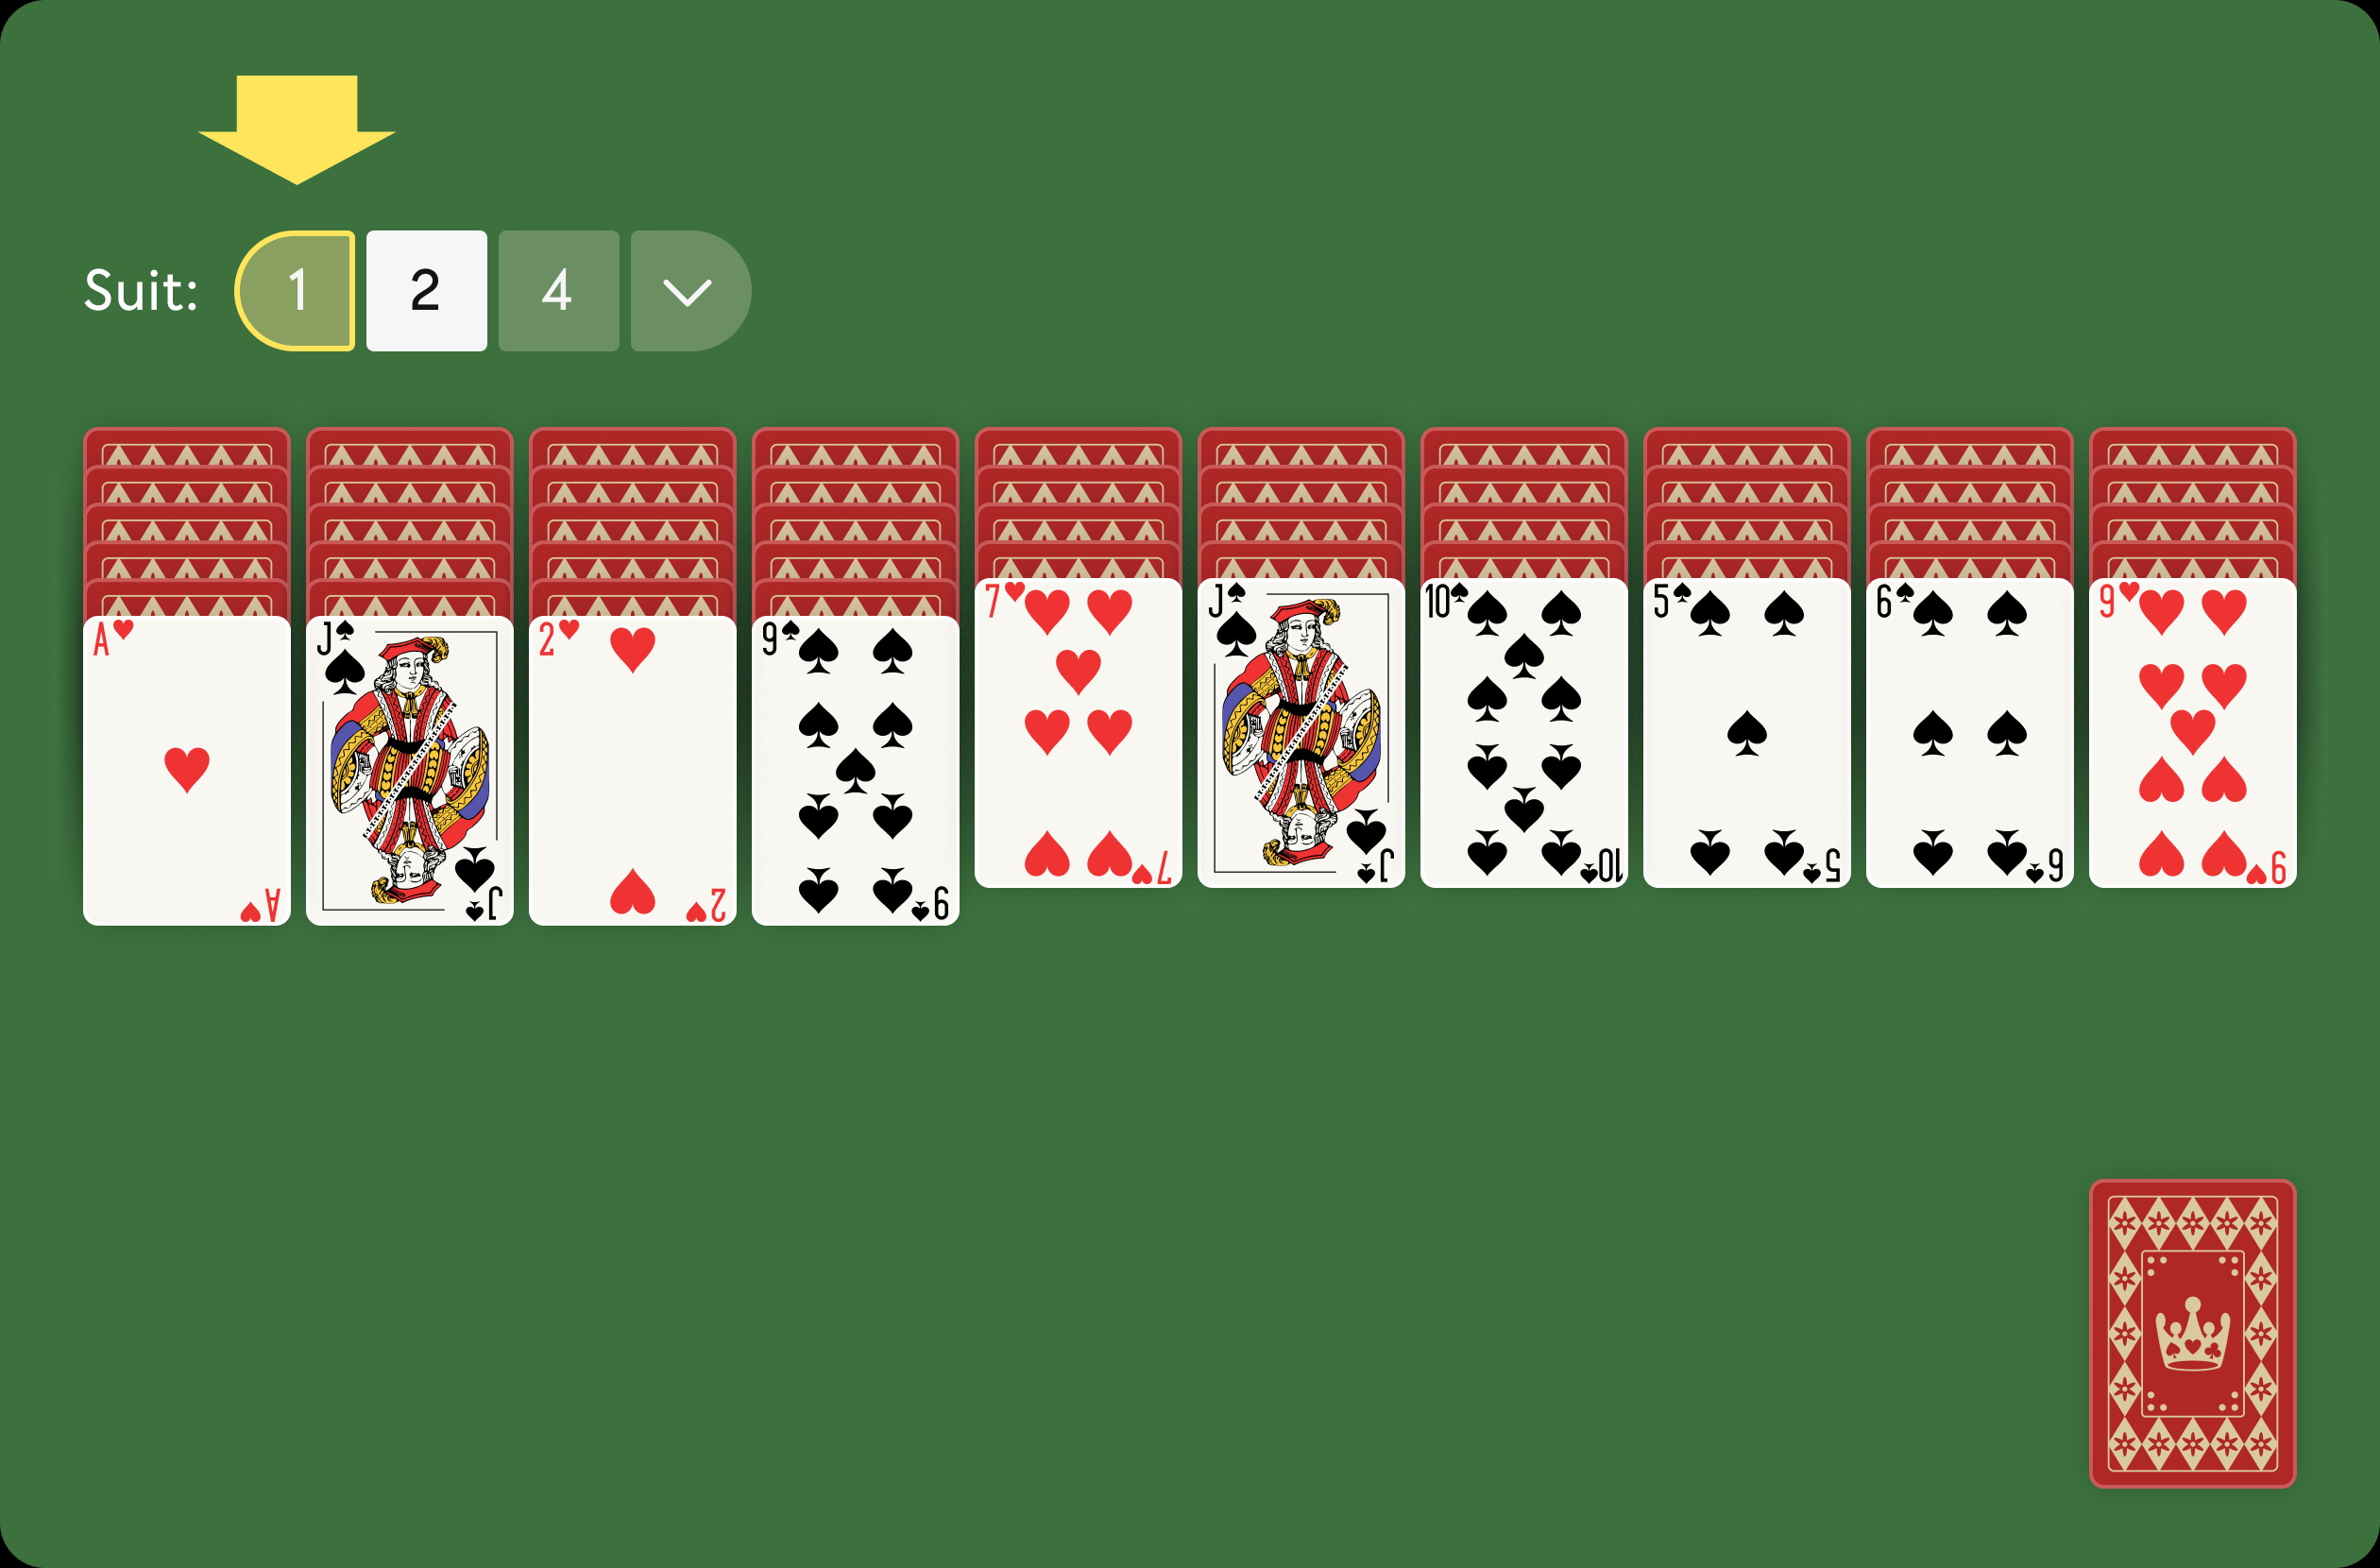 What is 2 Suits Spider Solitaire? 2